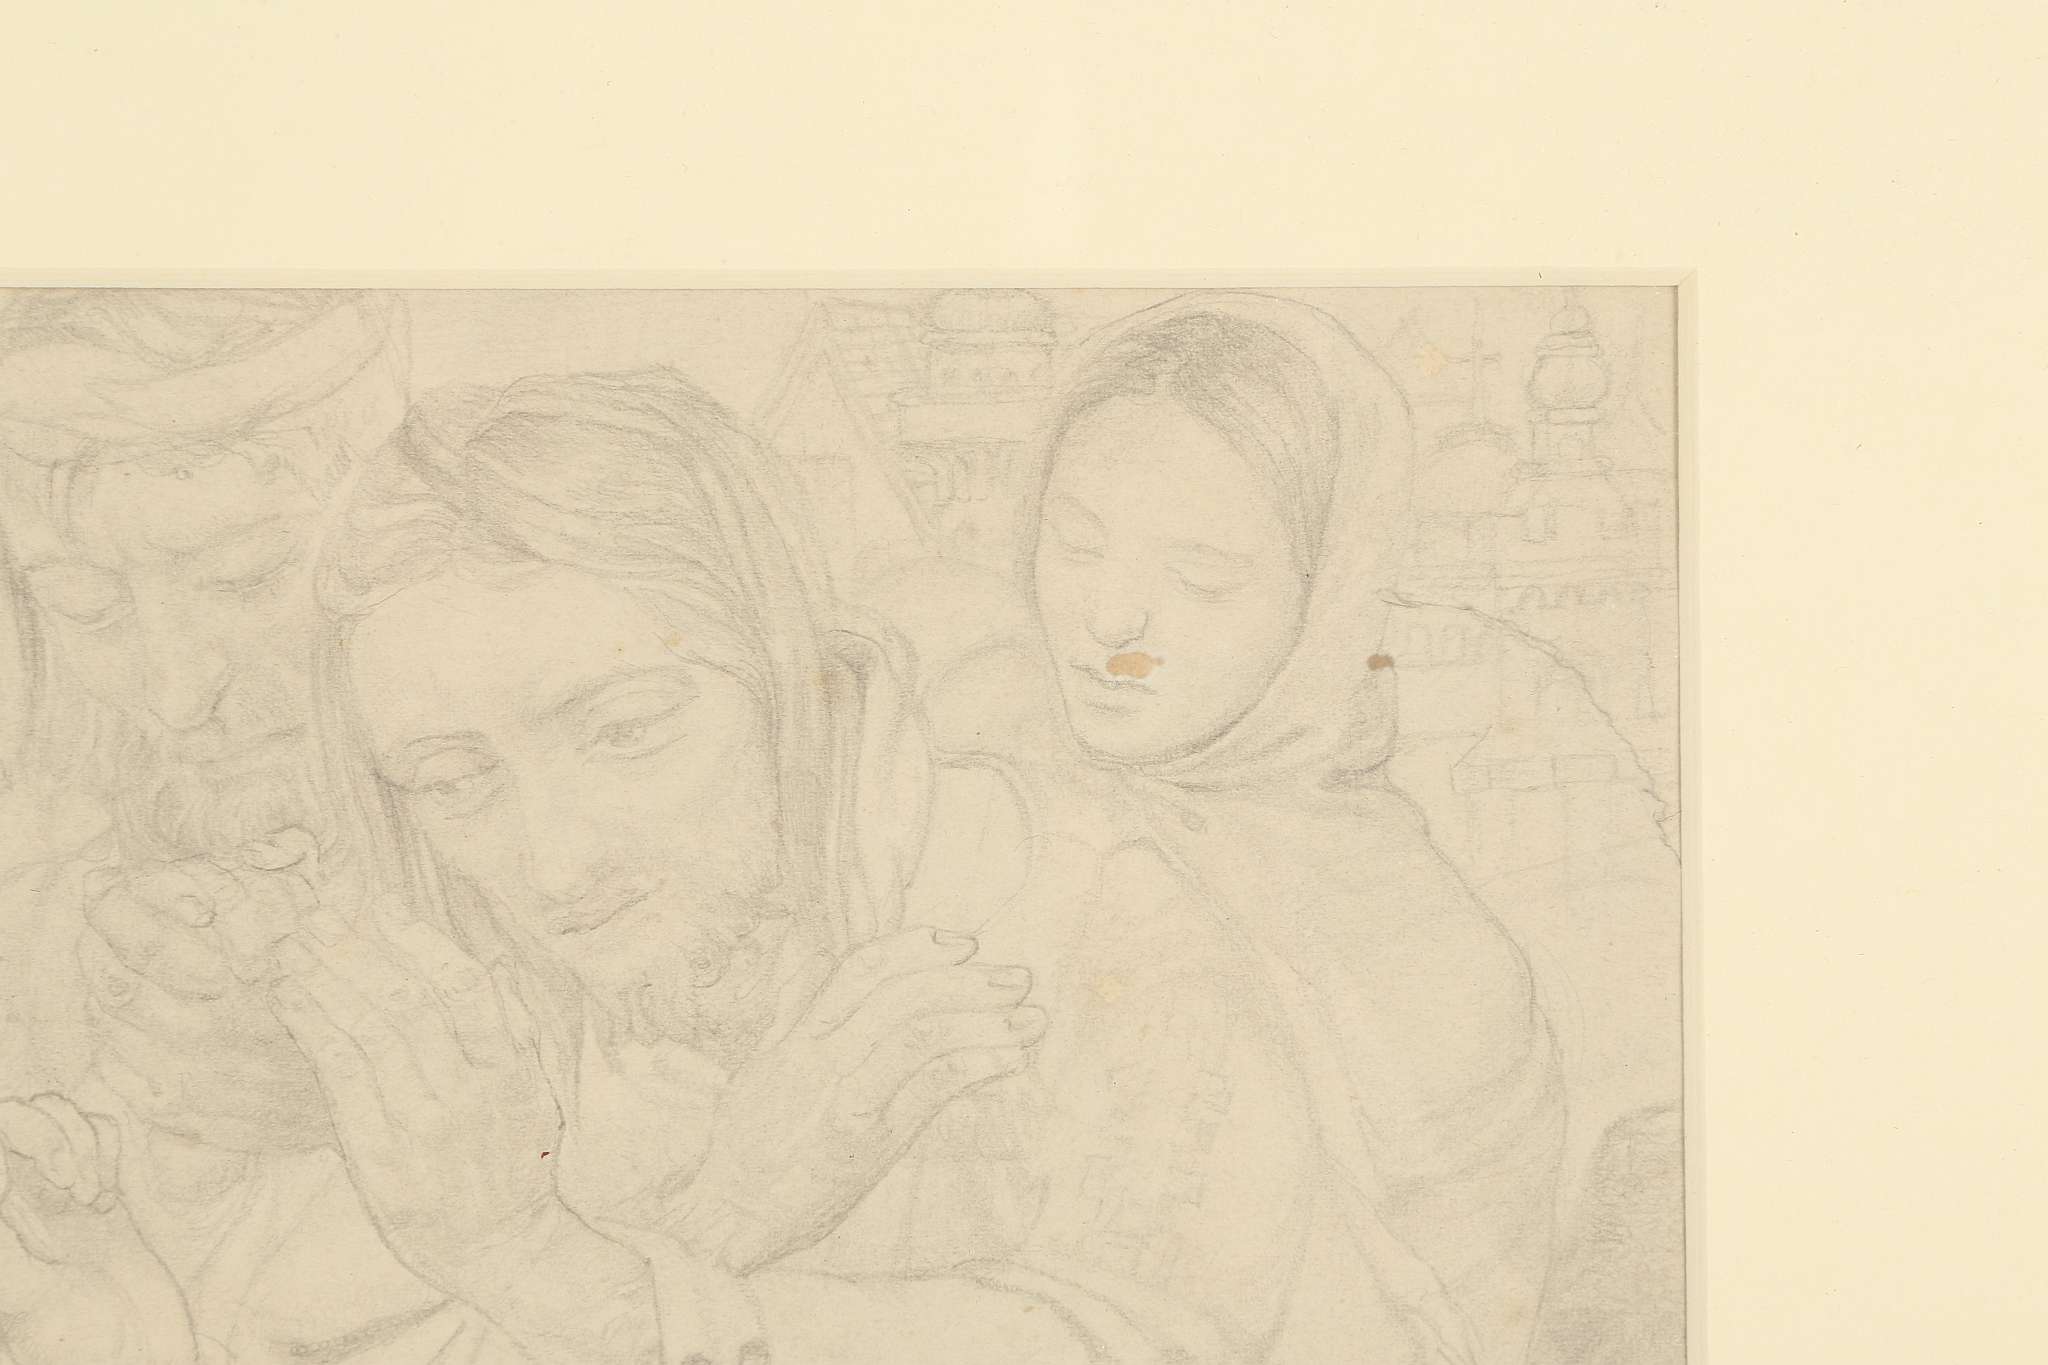 Noel Laura Nisbet R.I. 1881-1956, 'The Blessing', pencil with studio secession stamp lower right, - Image 5 of 8